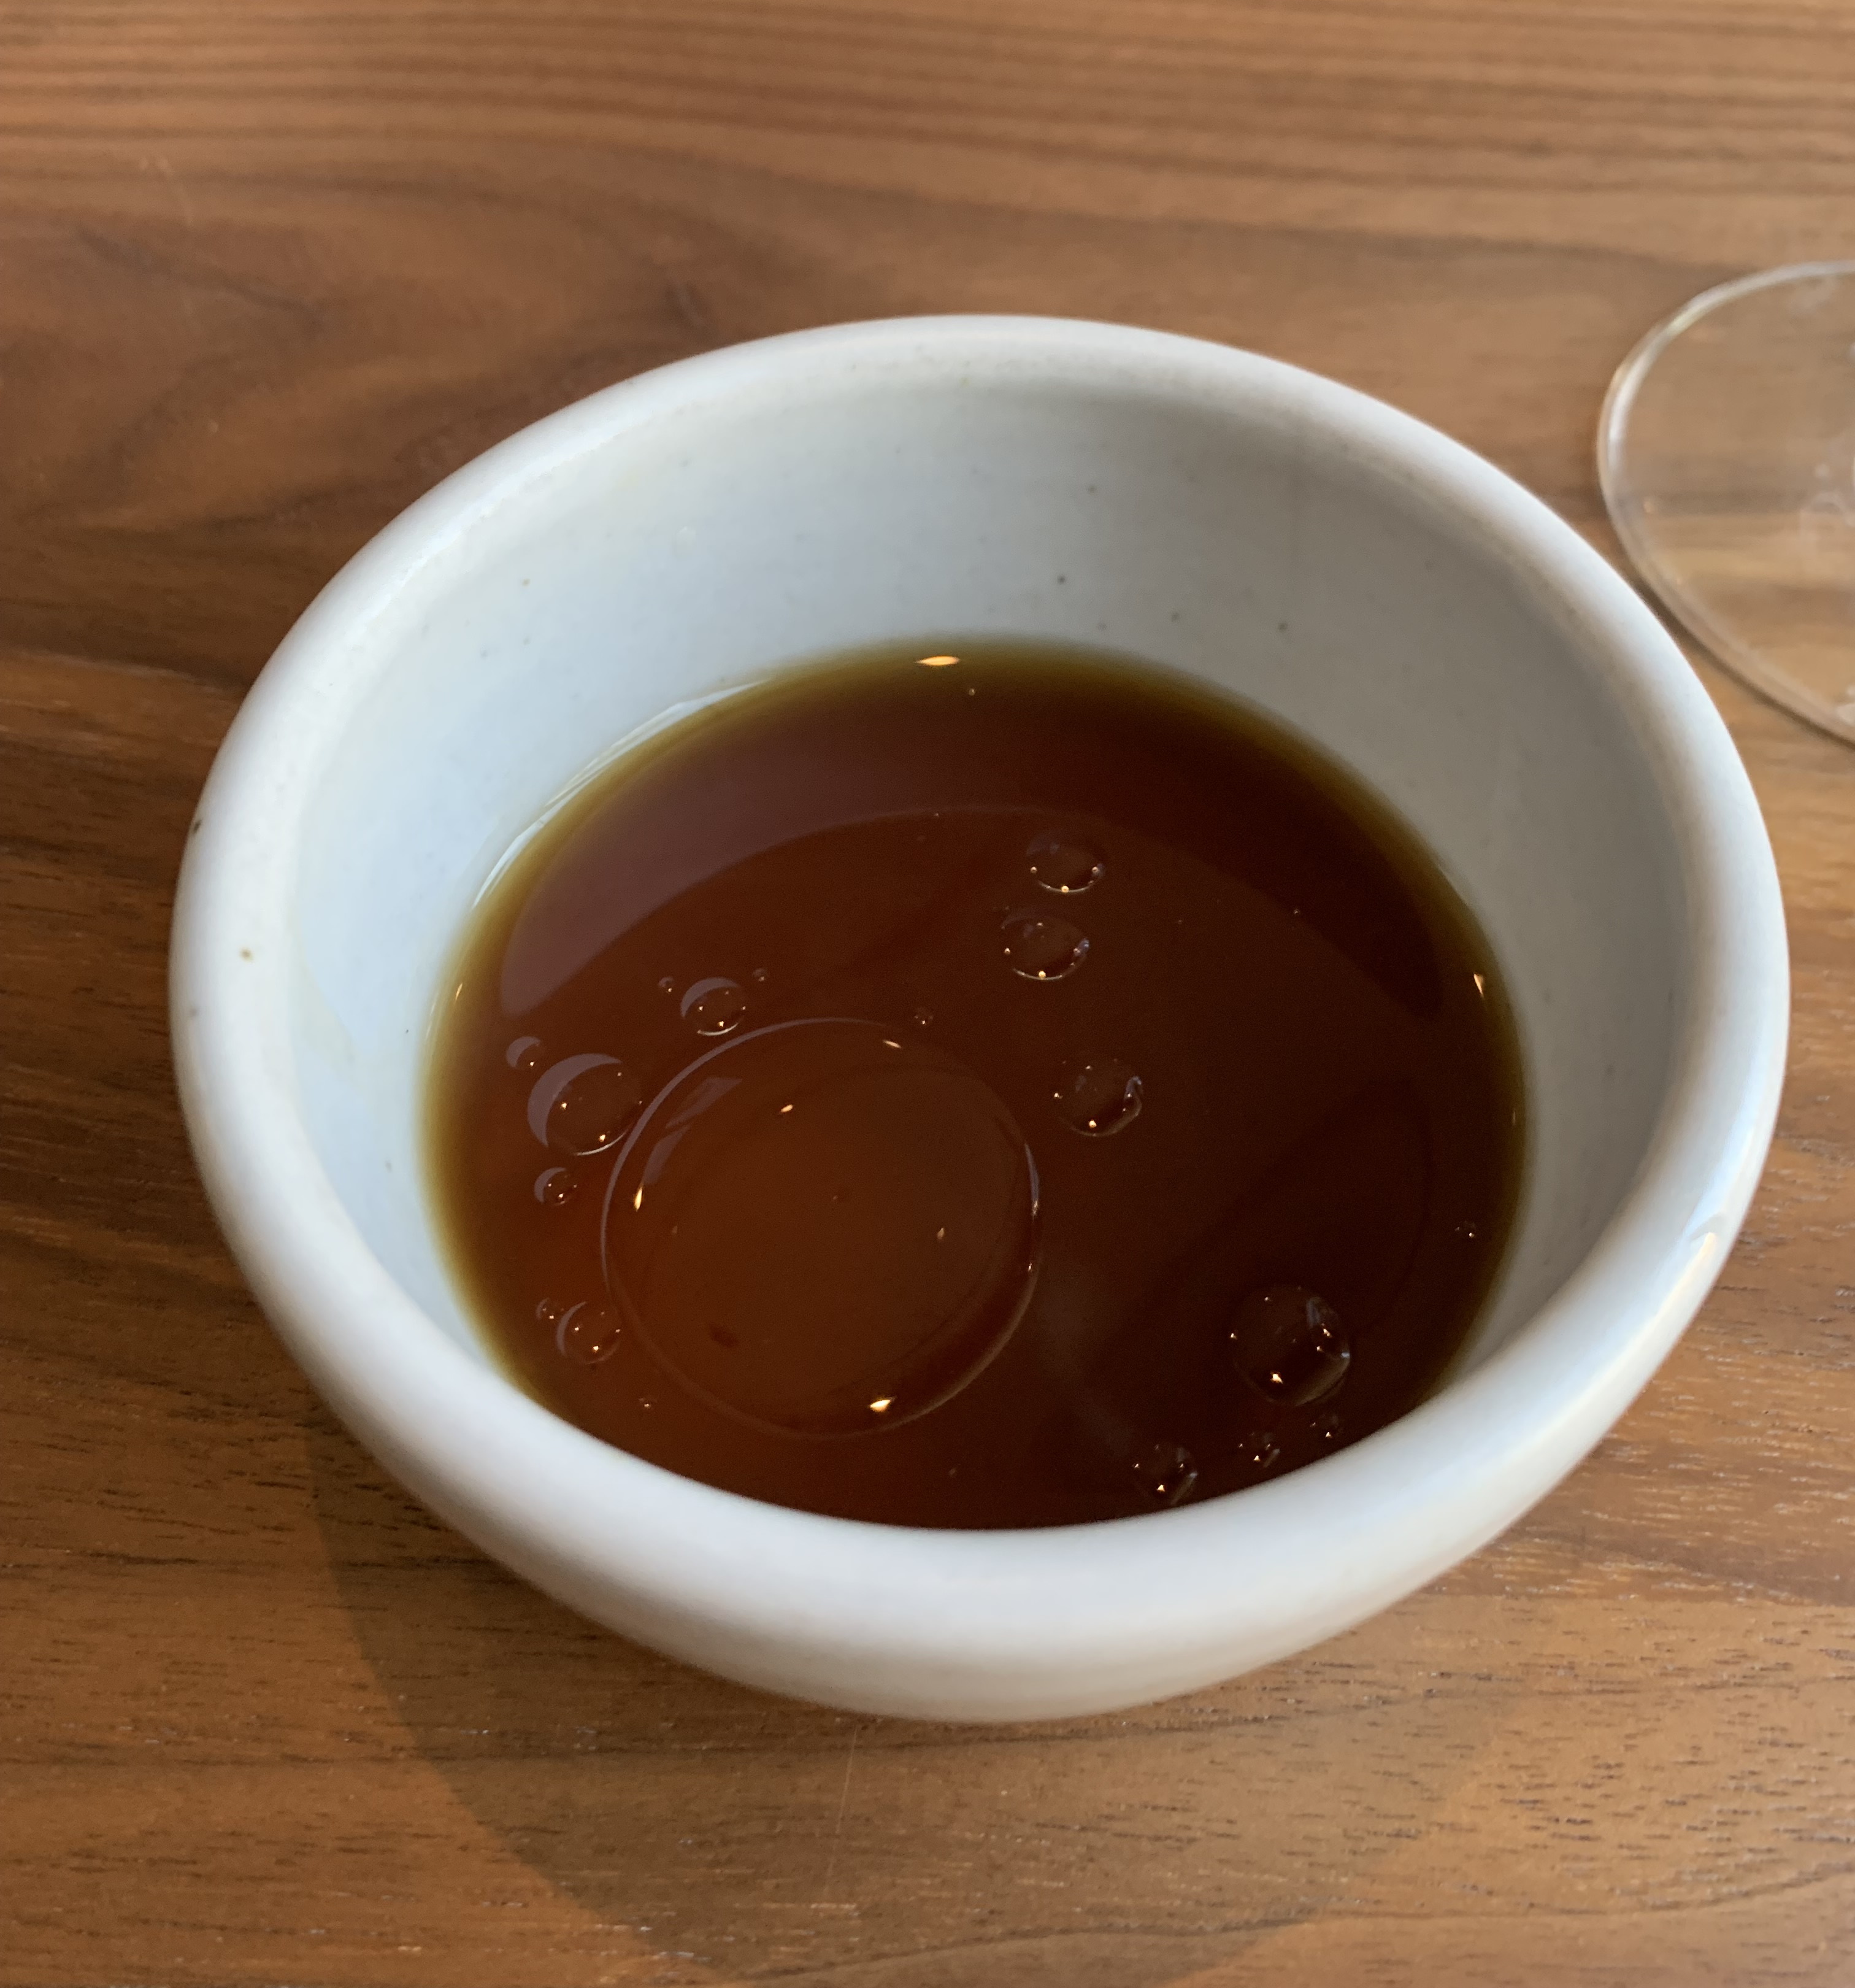 Shallow bowl of dark brown tea, with a few big drops of oil floating on the top